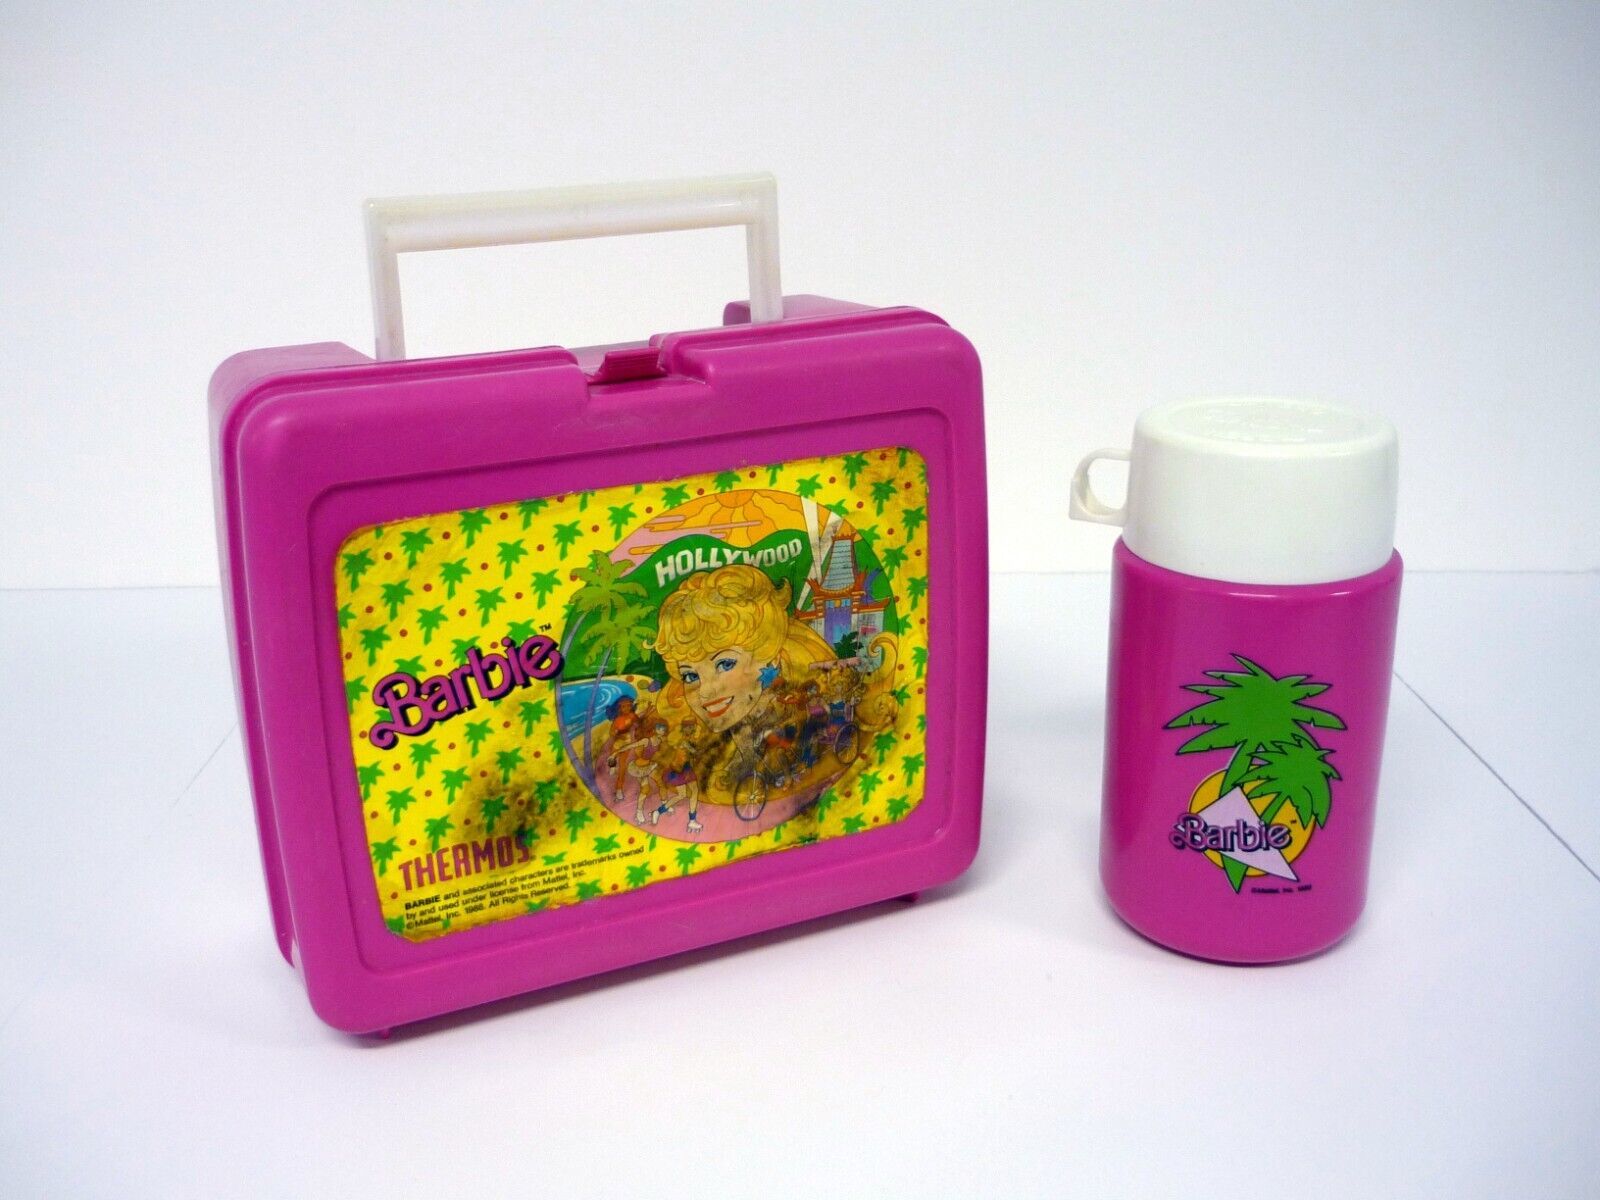 Barbie Hollywood Lunchbox Vintage Pink Plastic Lunch Box w/Thermos 1988 - $19.30